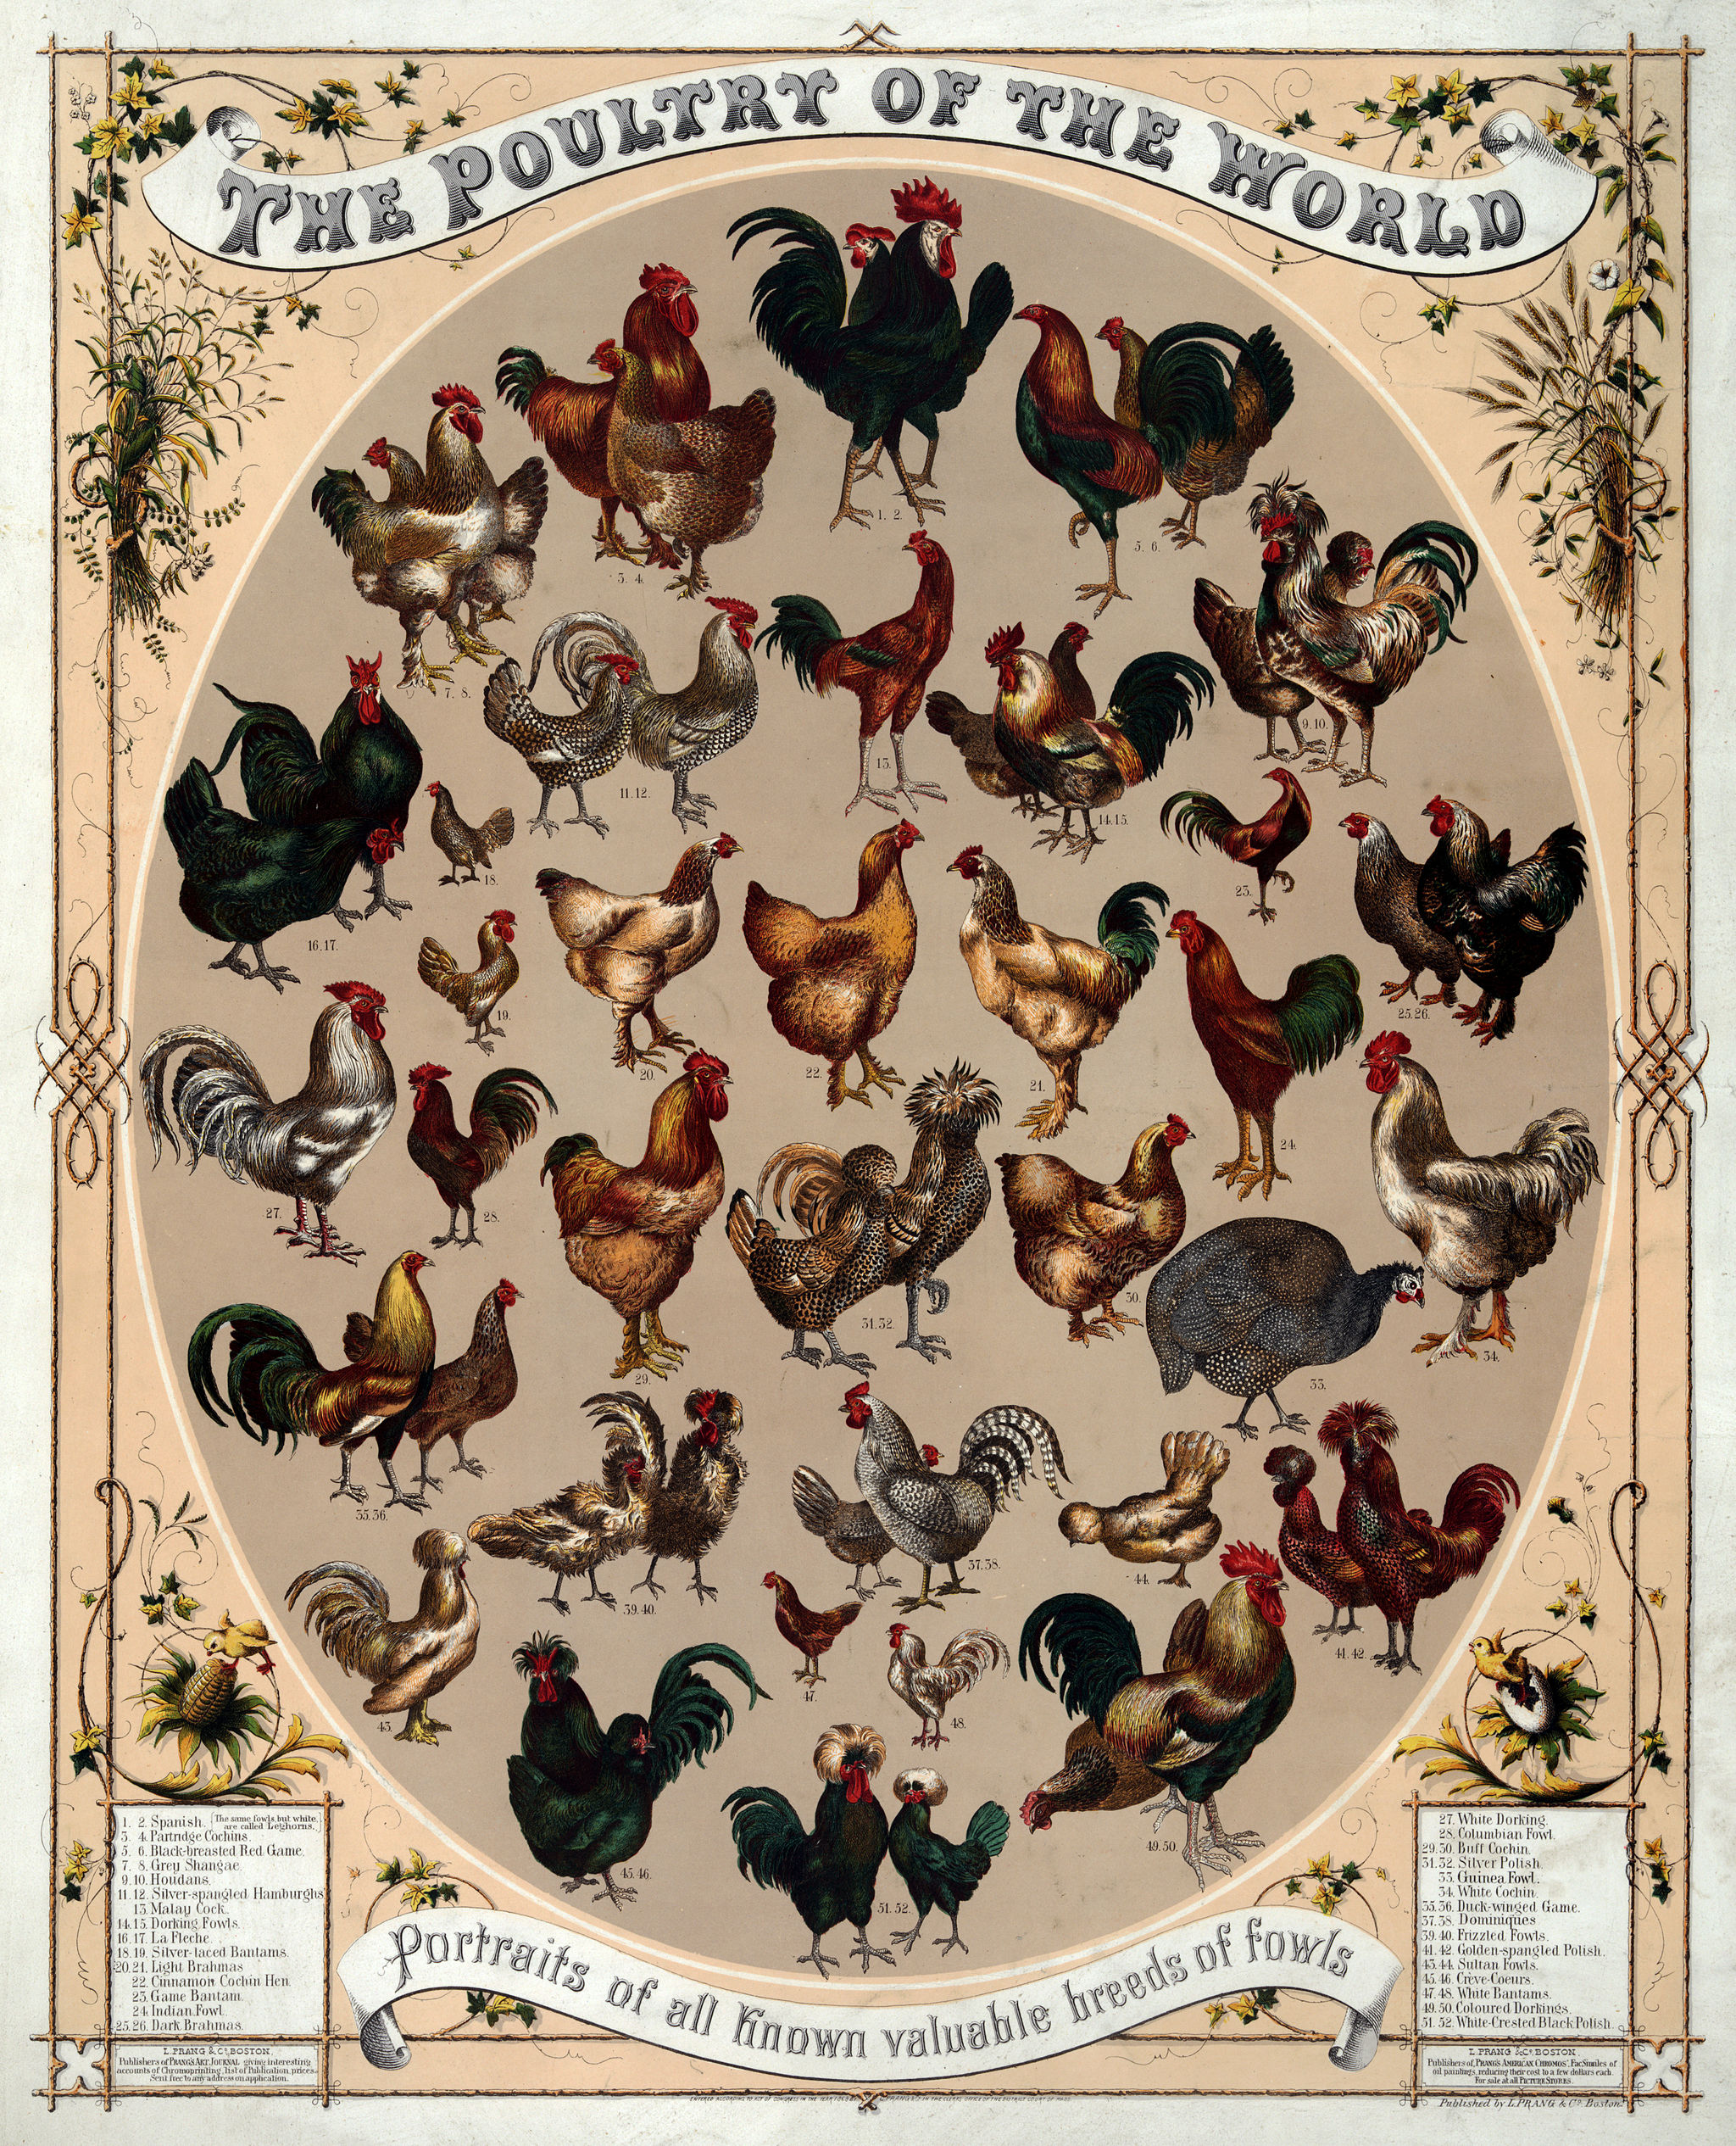 The poultry of the world. Portraits of all known valuable breeds of fowl. Thirty types of identified chickens (fifty-two individuals, male and female). Chromolithograph by L. Prang & Co., Boston, c.1868